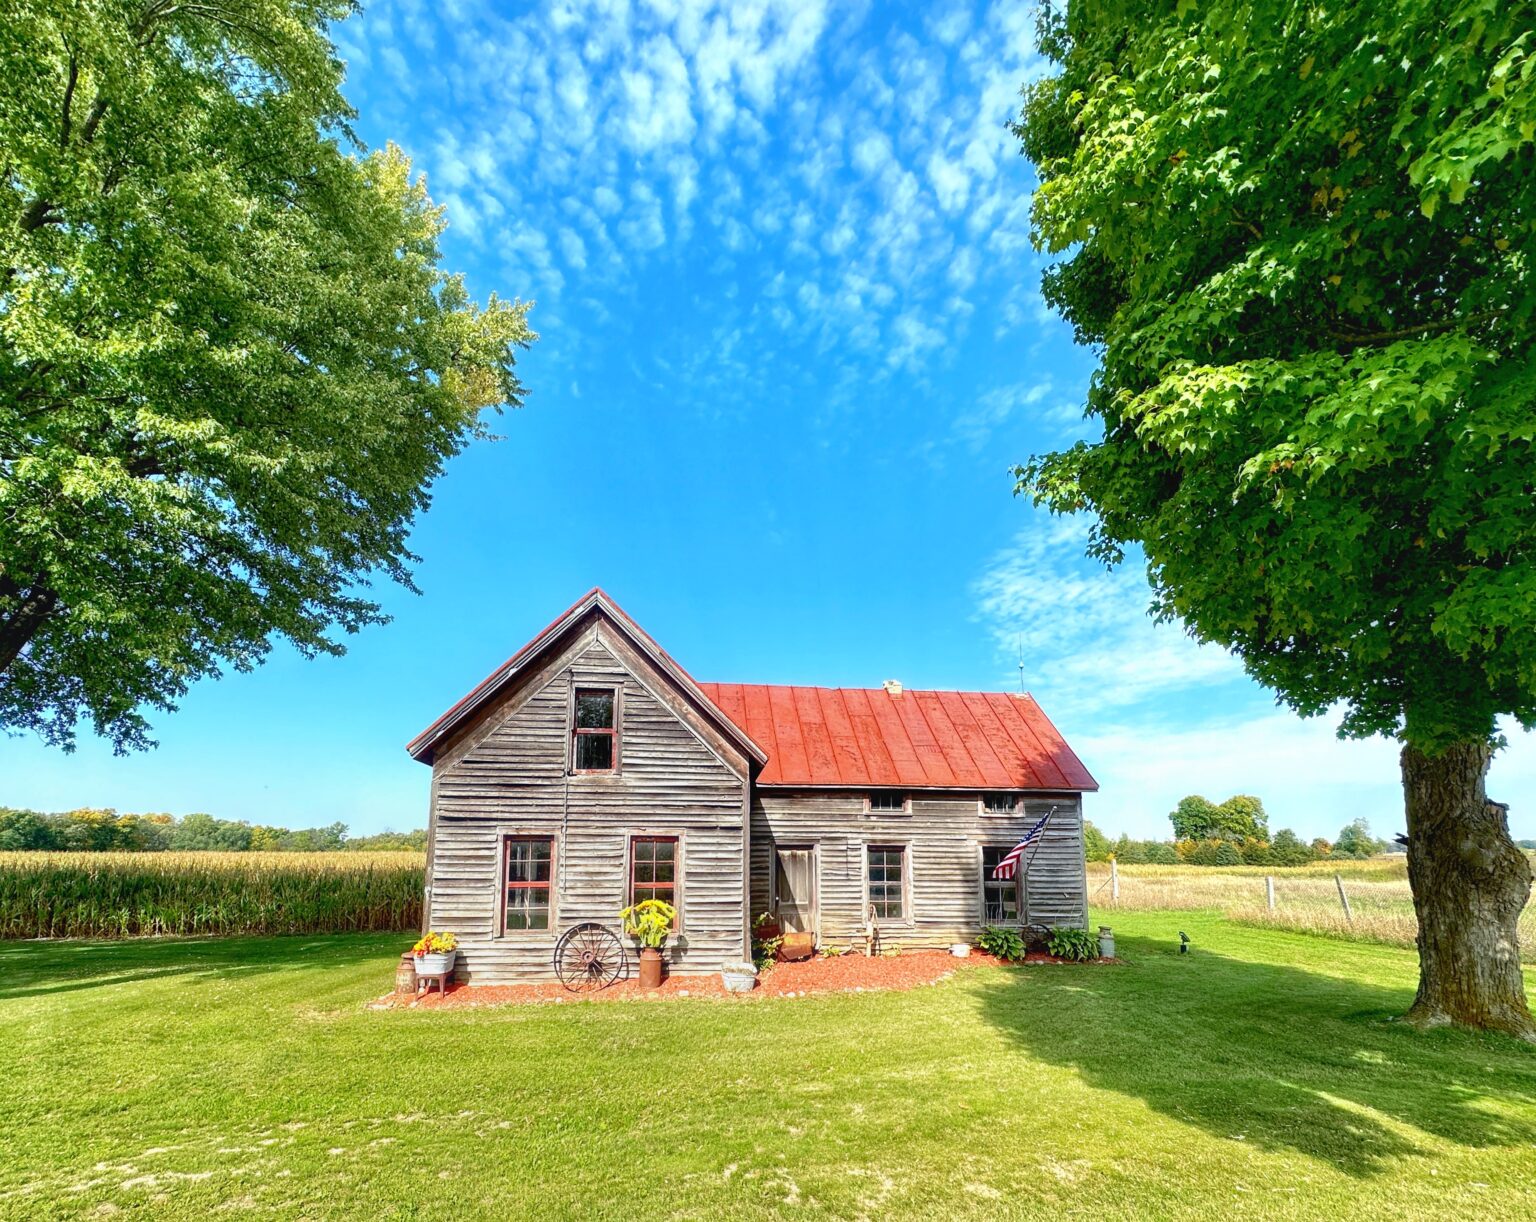 An old farmhouse with a red roof in the middle of a field.